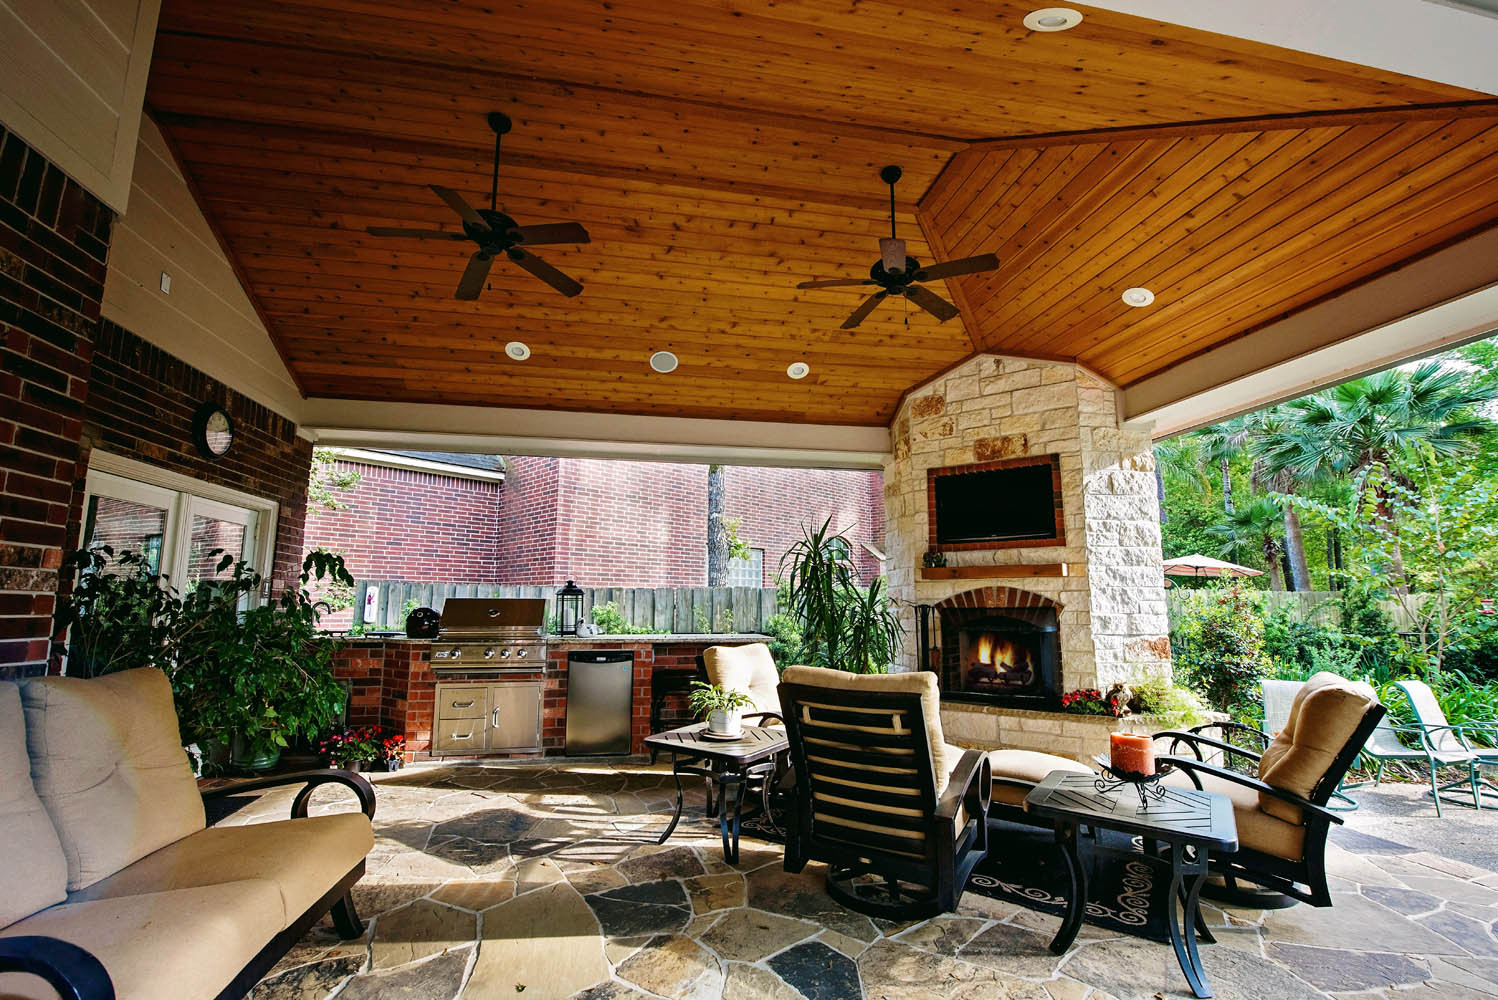 Outdoor Kitchen And Fireplace
 Houston Outdoor kitchens Spring s